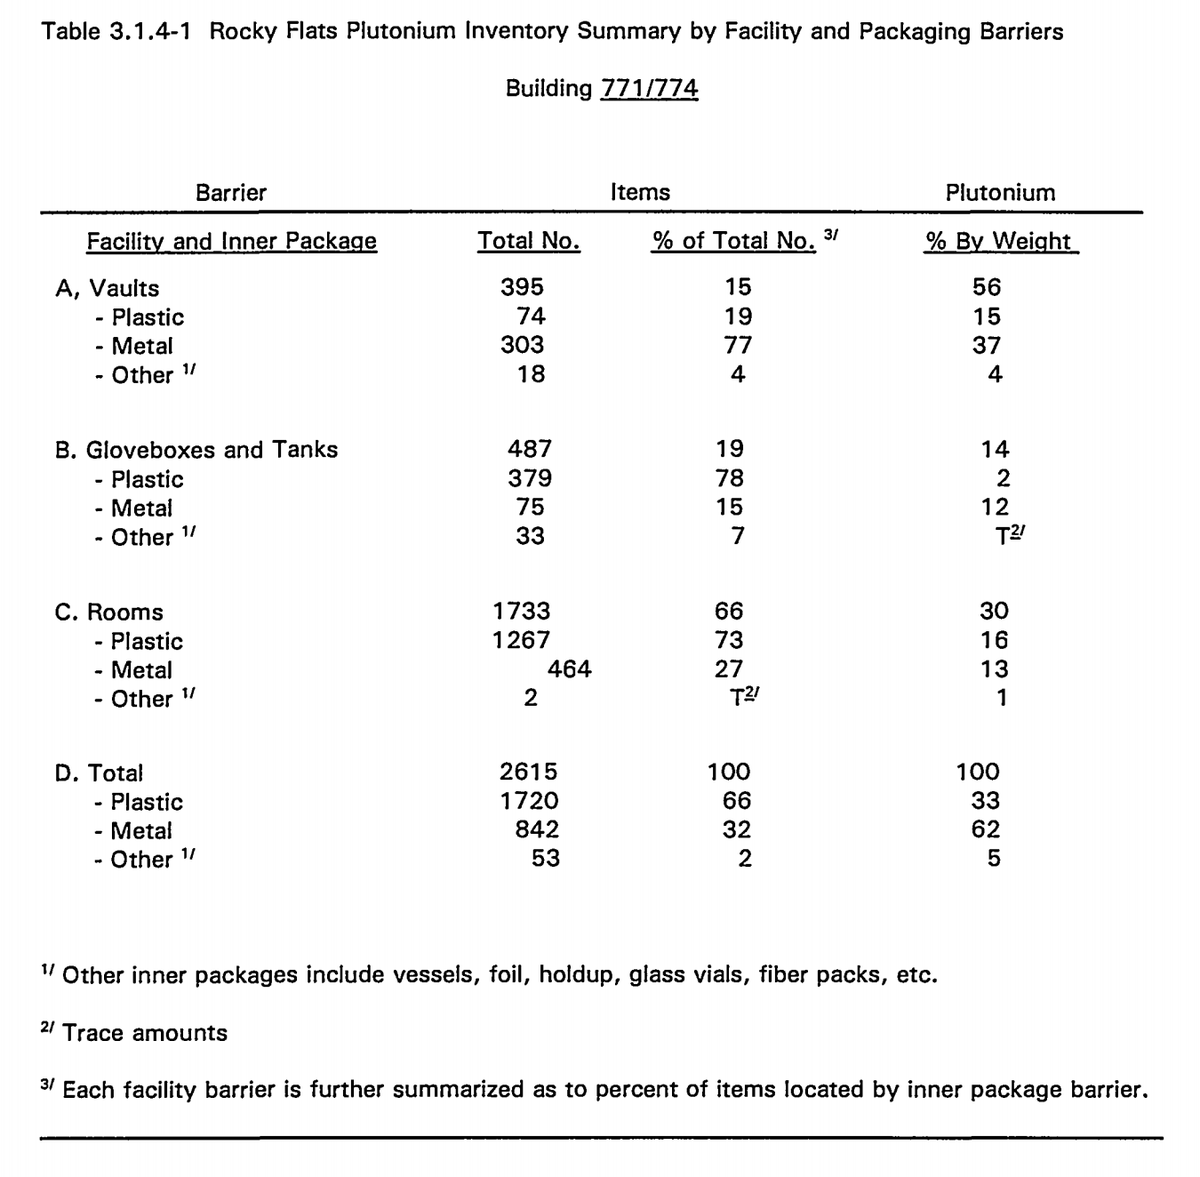 this document is exhausting, it's basically page after page of "... and this building is just increasingly full of radioactive trash that no one knows what to do with. Here's where we estimate all the plutonium contamination is. fuck."